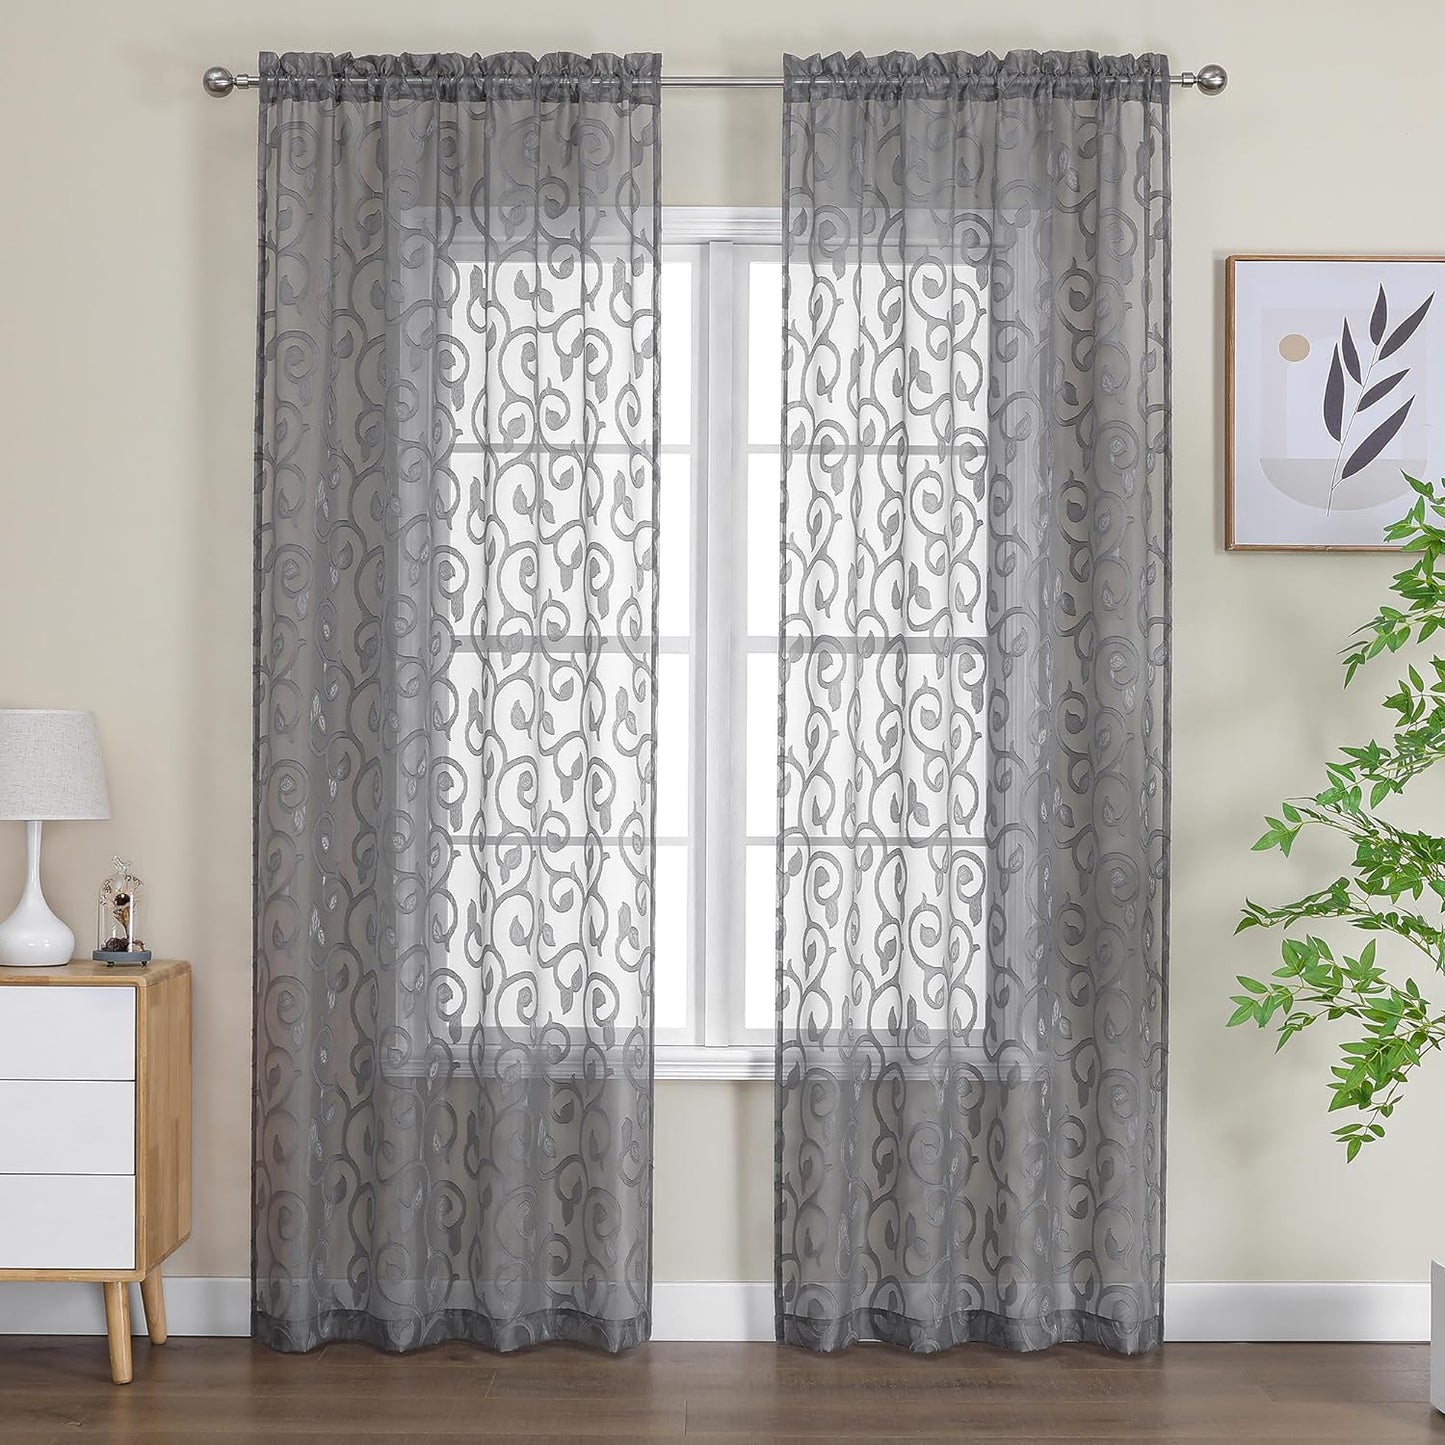 OWENIE Furman Sheer White Curtains 84 Inches Long for Bedroom Living Room 2 Panels Set, White Curtains Jacquard Clip Light Filtering Semi Sheer Curtain Transparent Rod Pocket Window Drapes, 2 Pcs  OWENIE Charcoal Gray 40W X 96L 